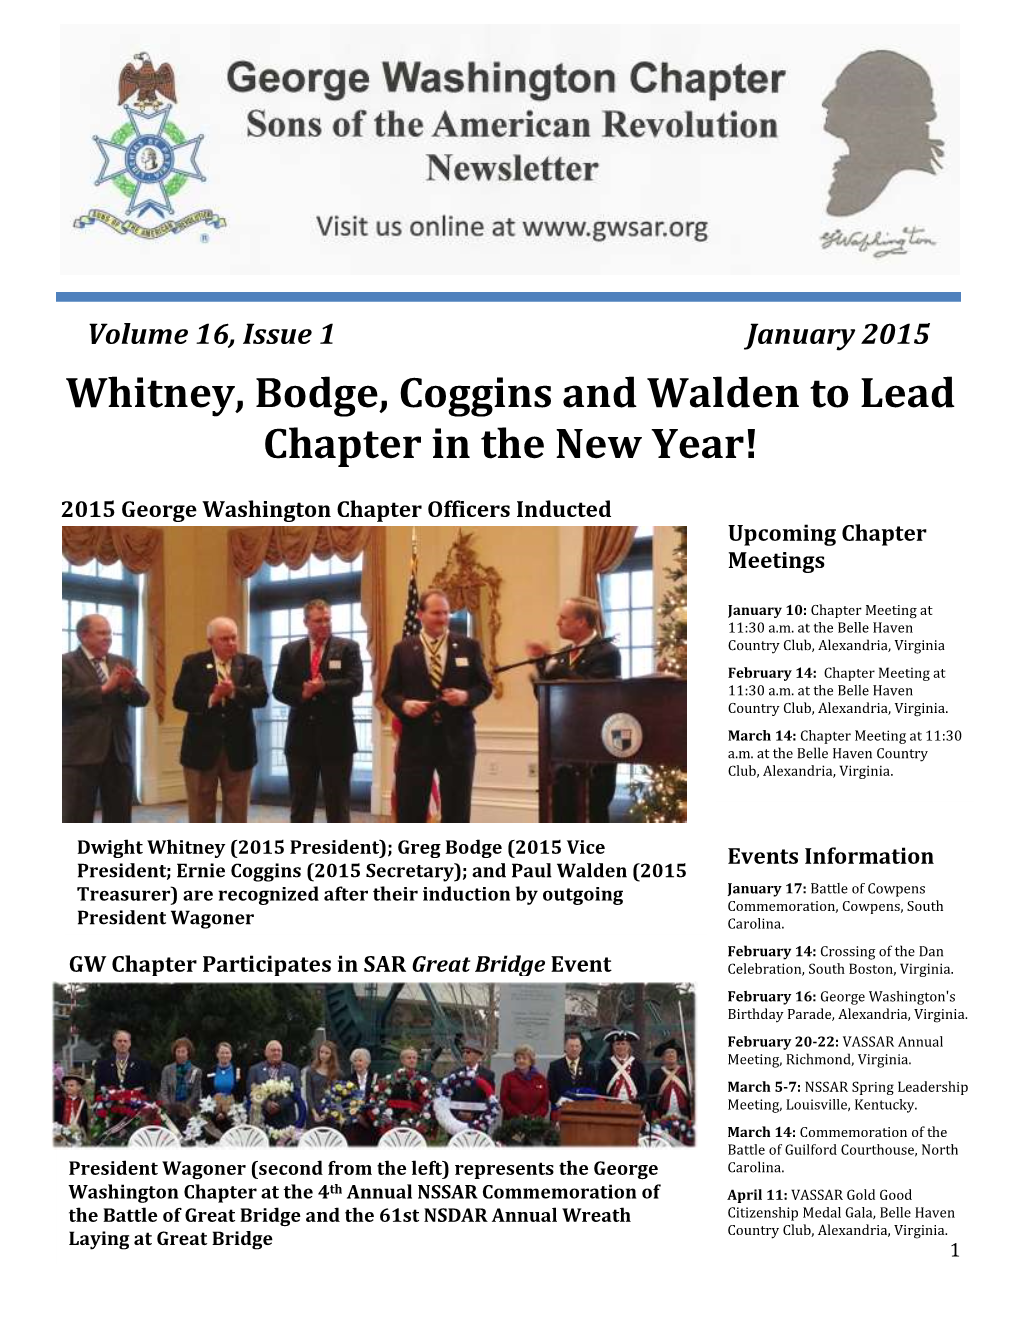 Whitney, Bodge, Coggins and Walden to Lead Chapter in the New Year!